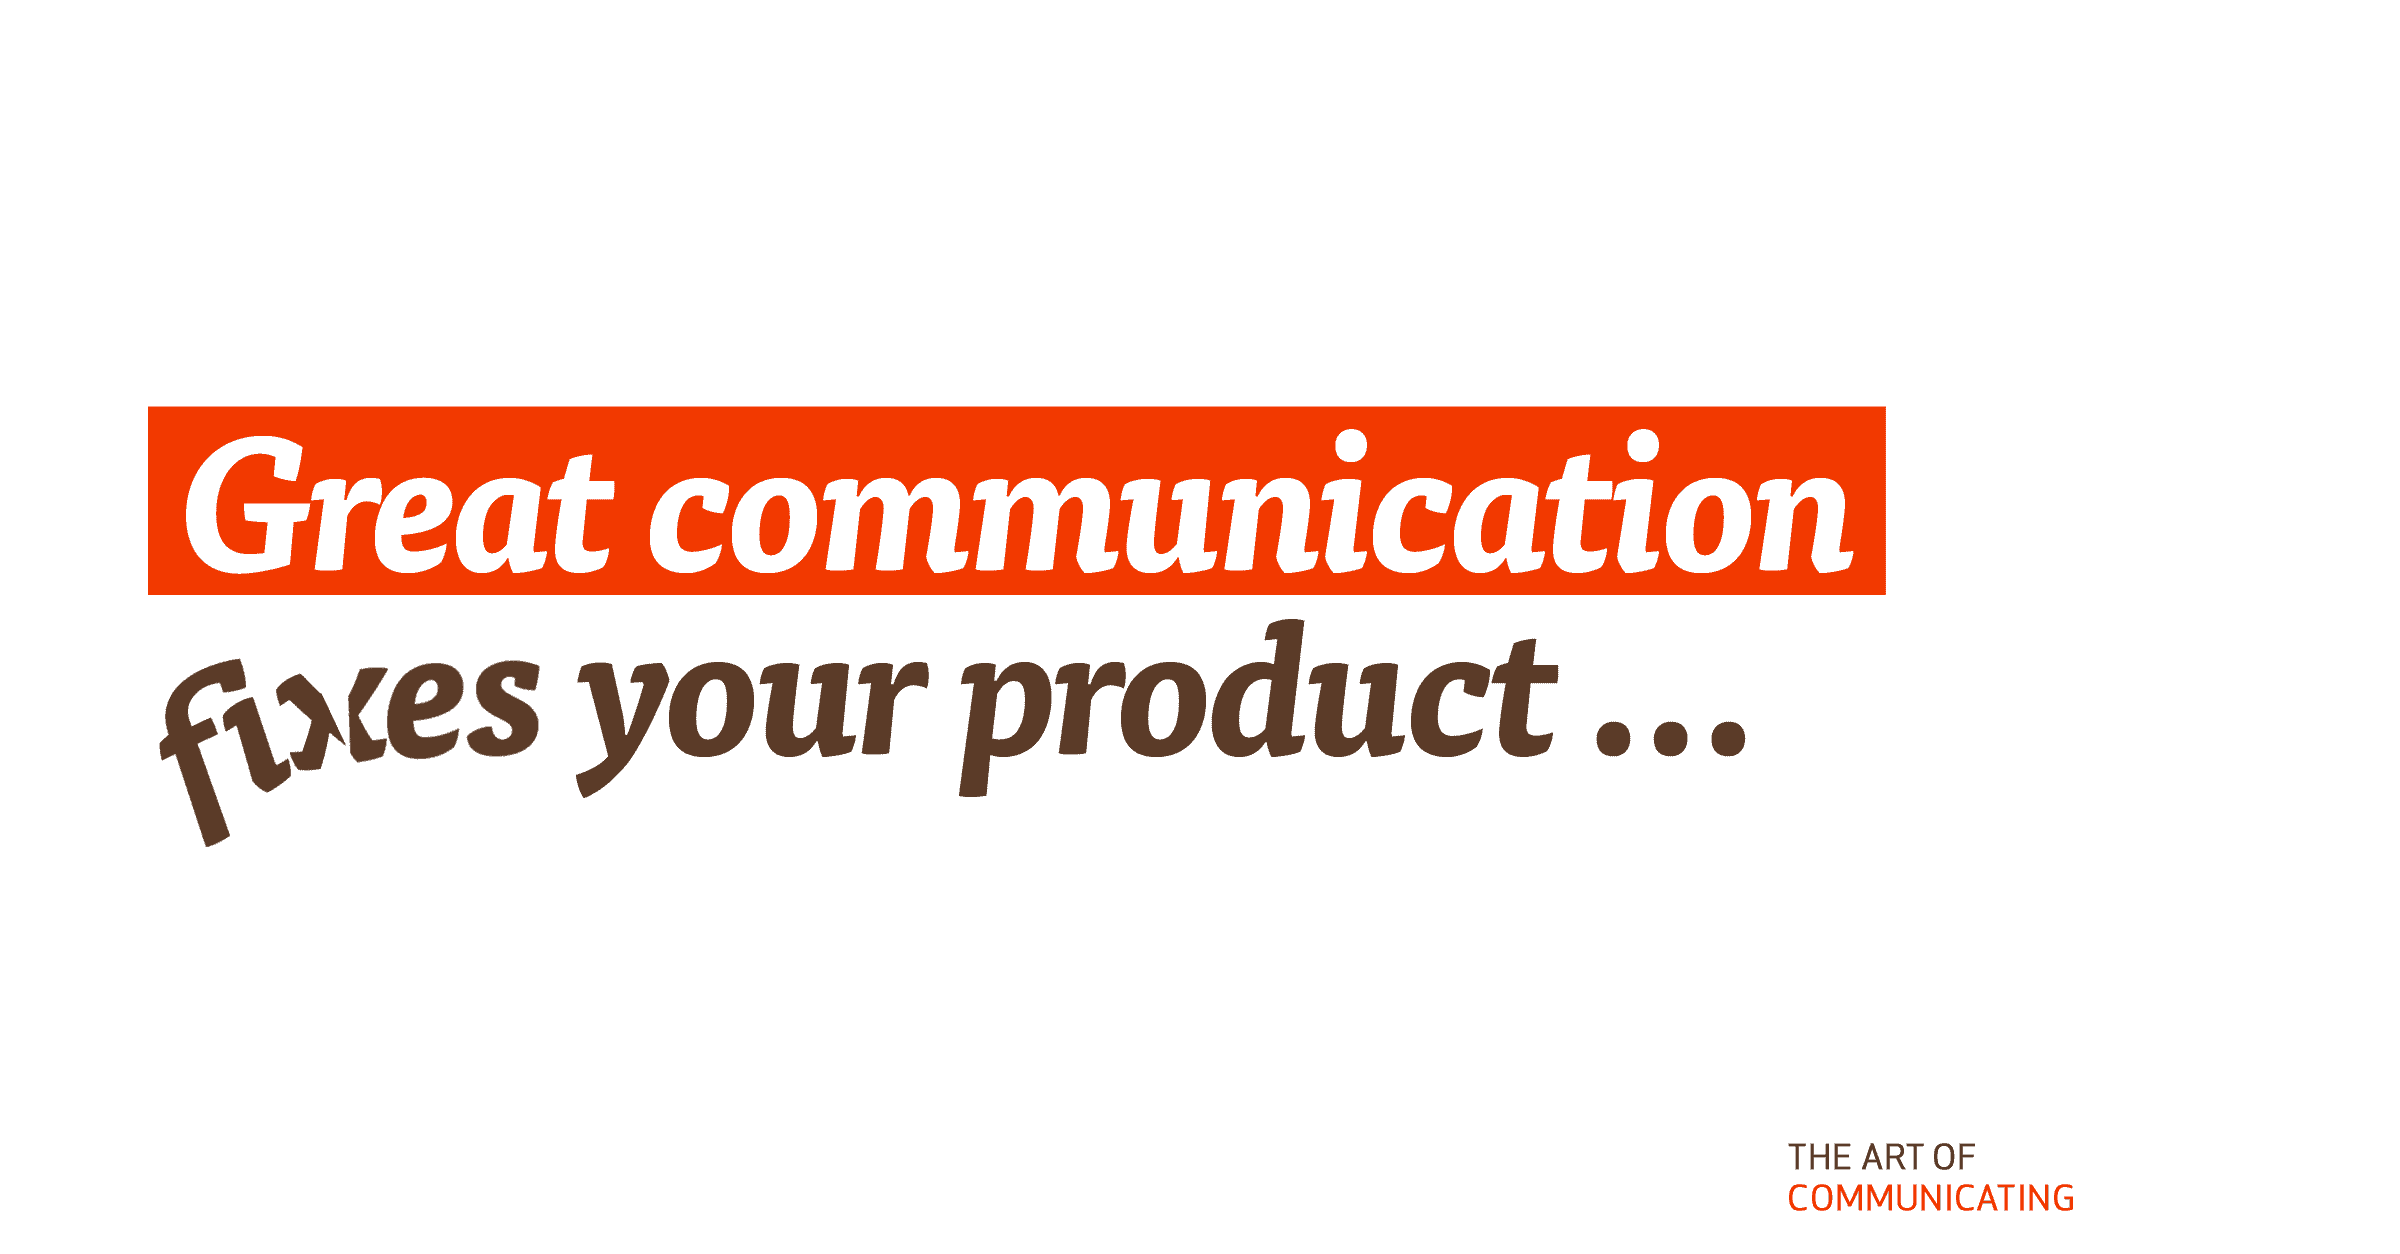 Great communication fixes your product